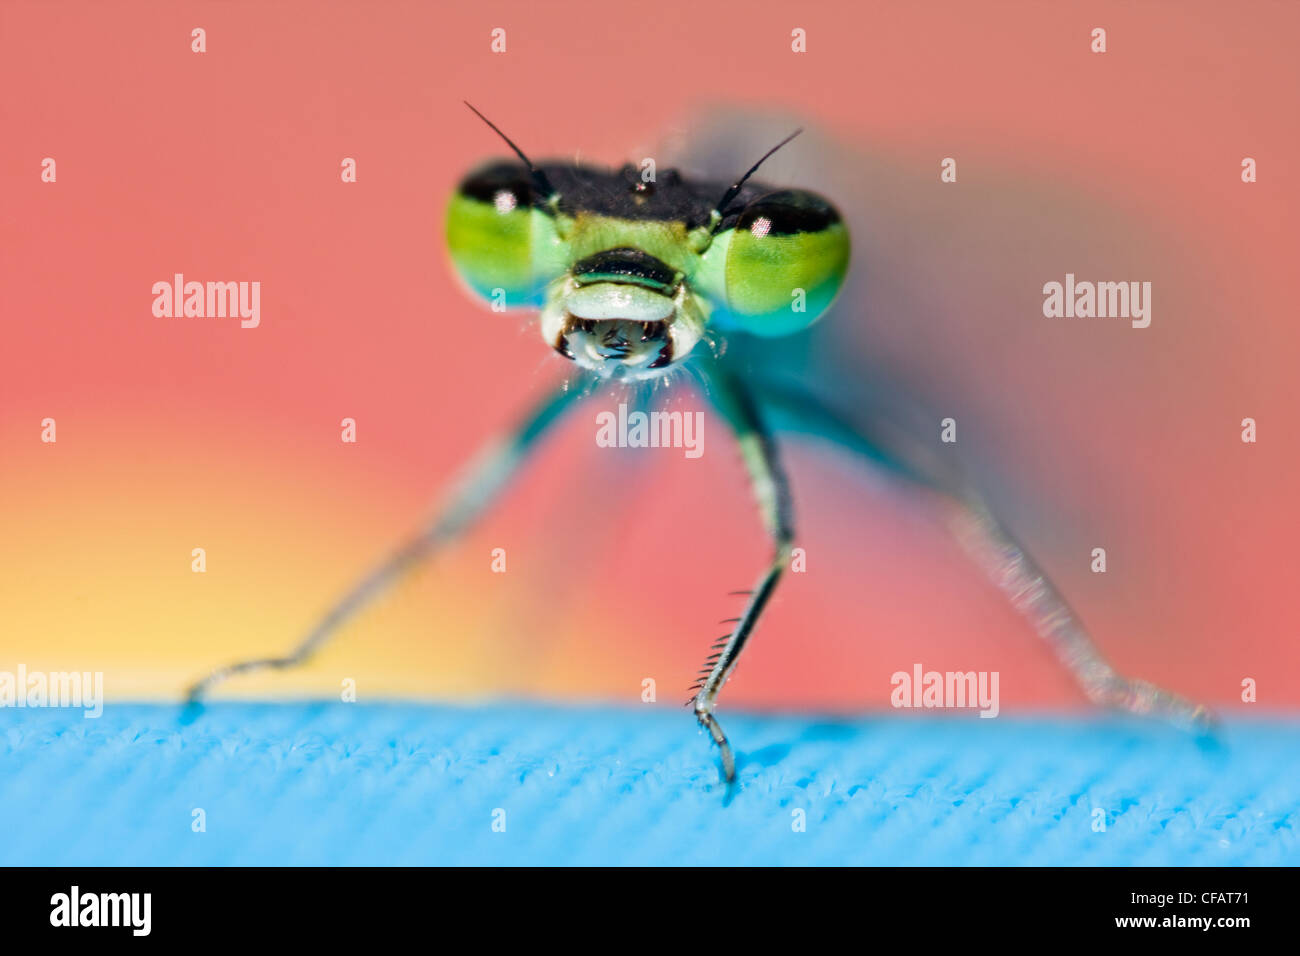 Close-up of dragonfly with mouth open Stock Photo